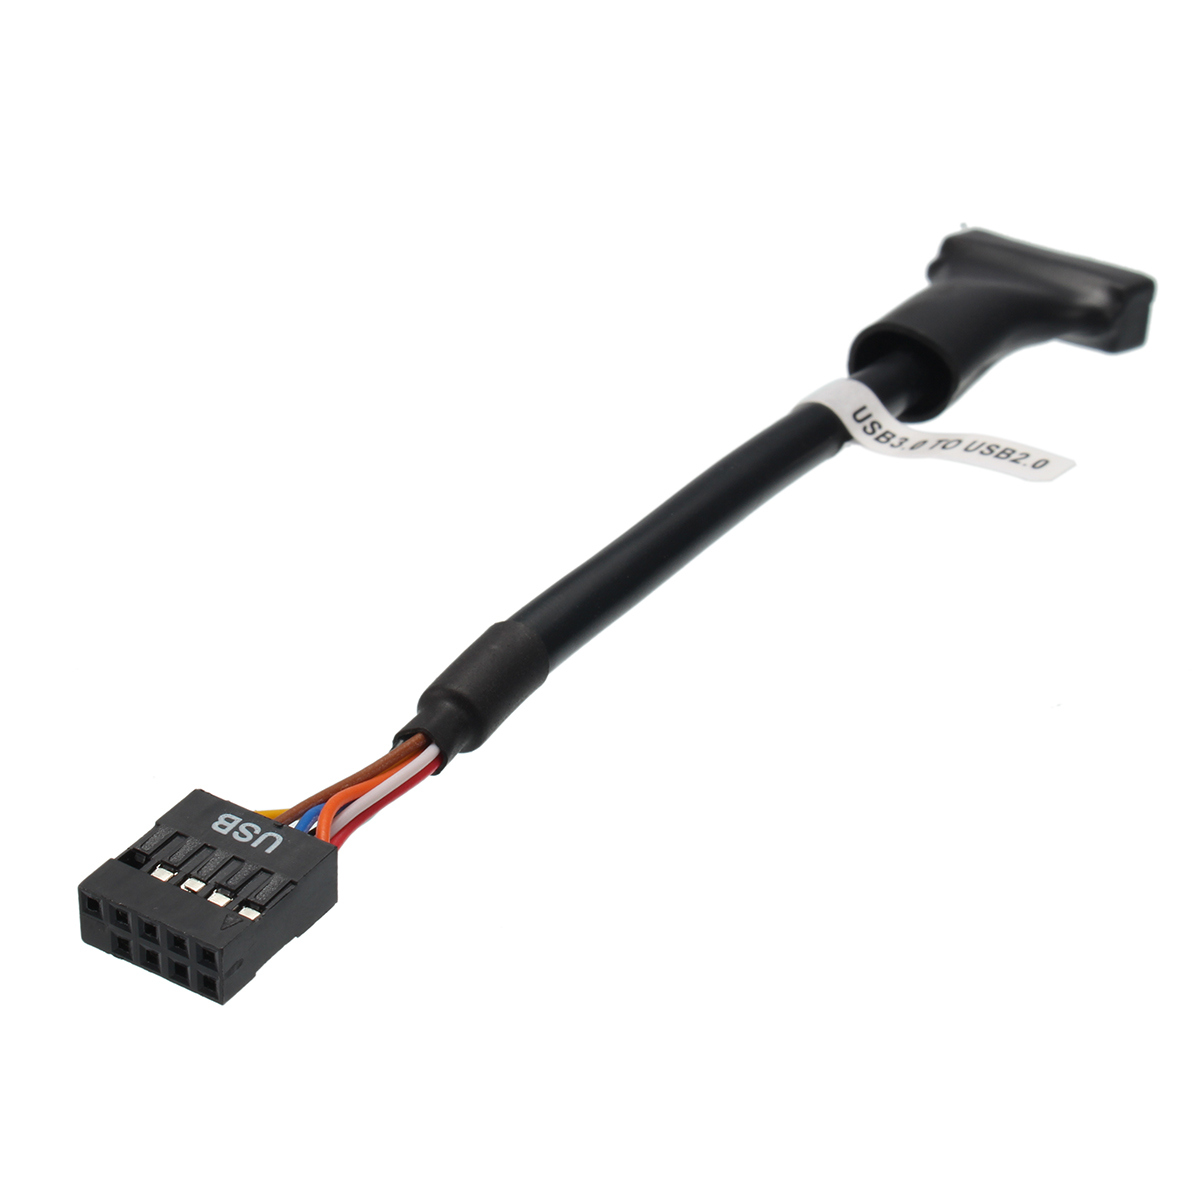 20pin-to-9pin-USB-30-to-USB-20-Cable-Adapter-1160188